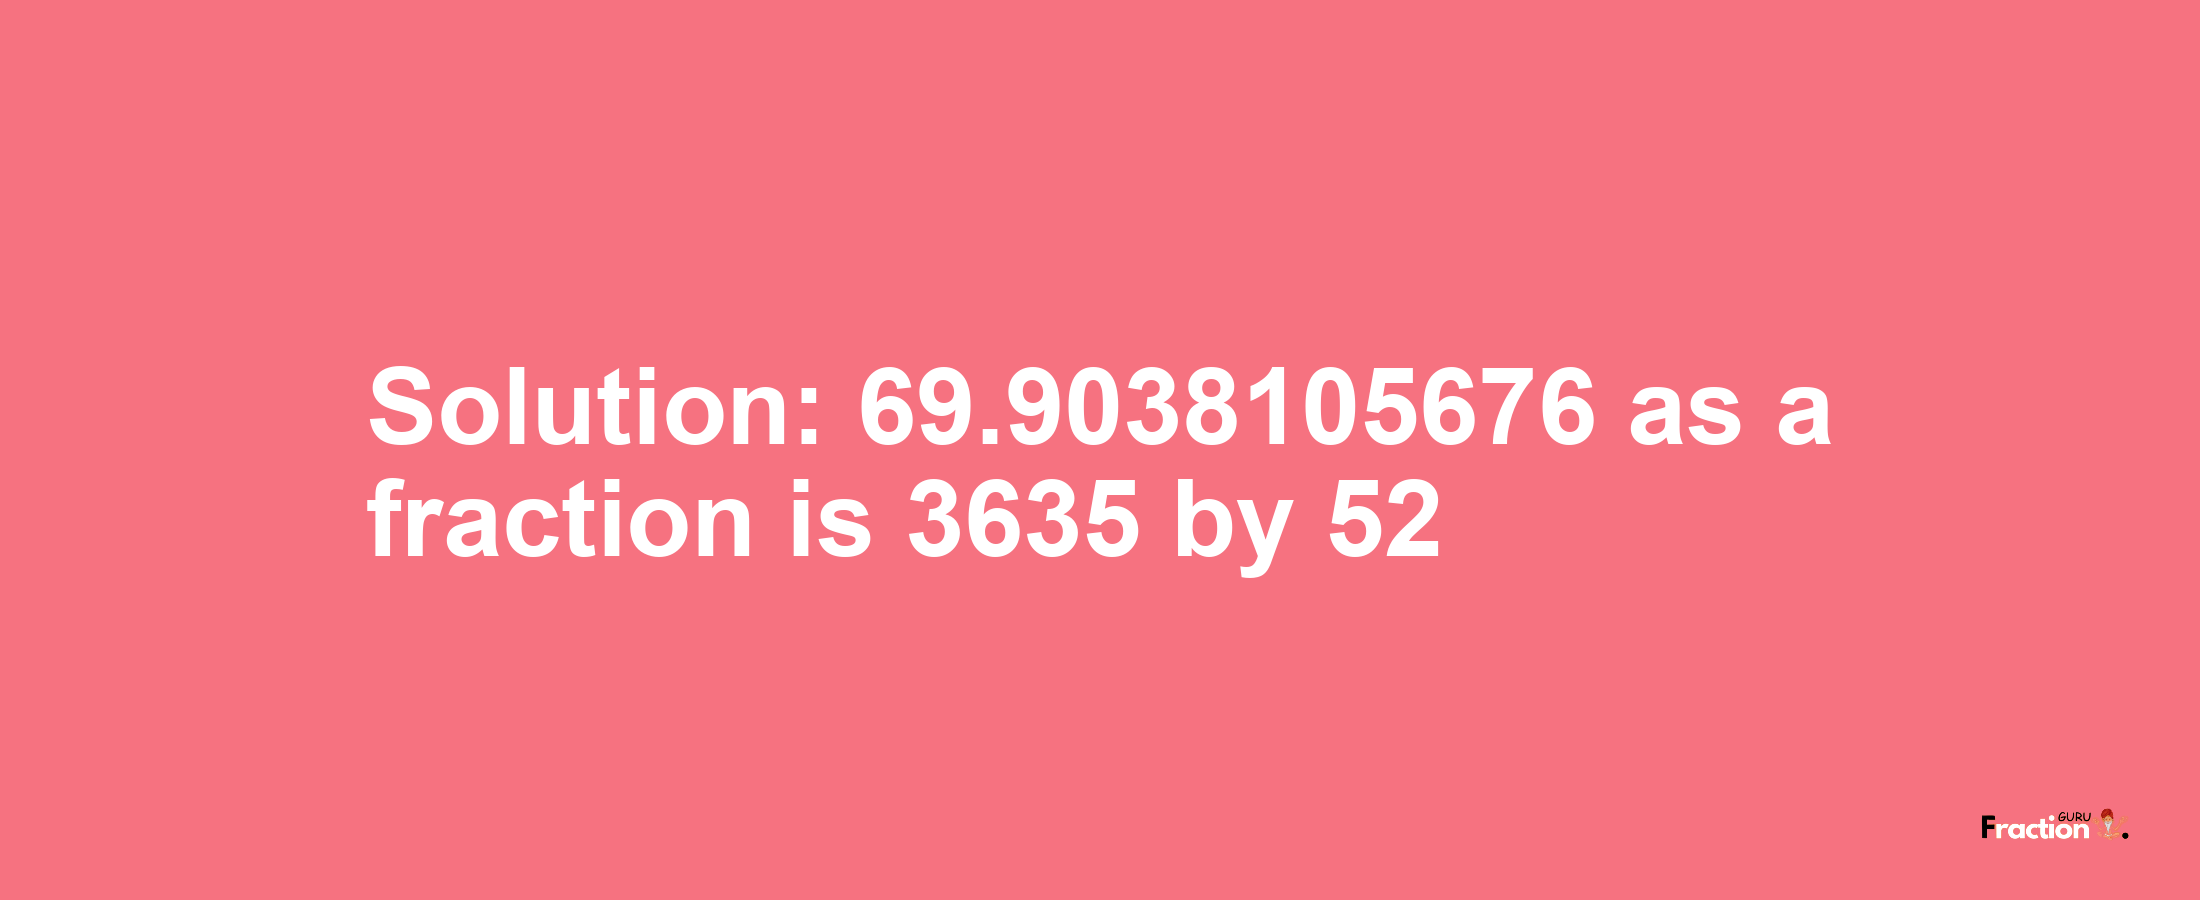 Solution:69.9038105676 as a fraction is 3635/52